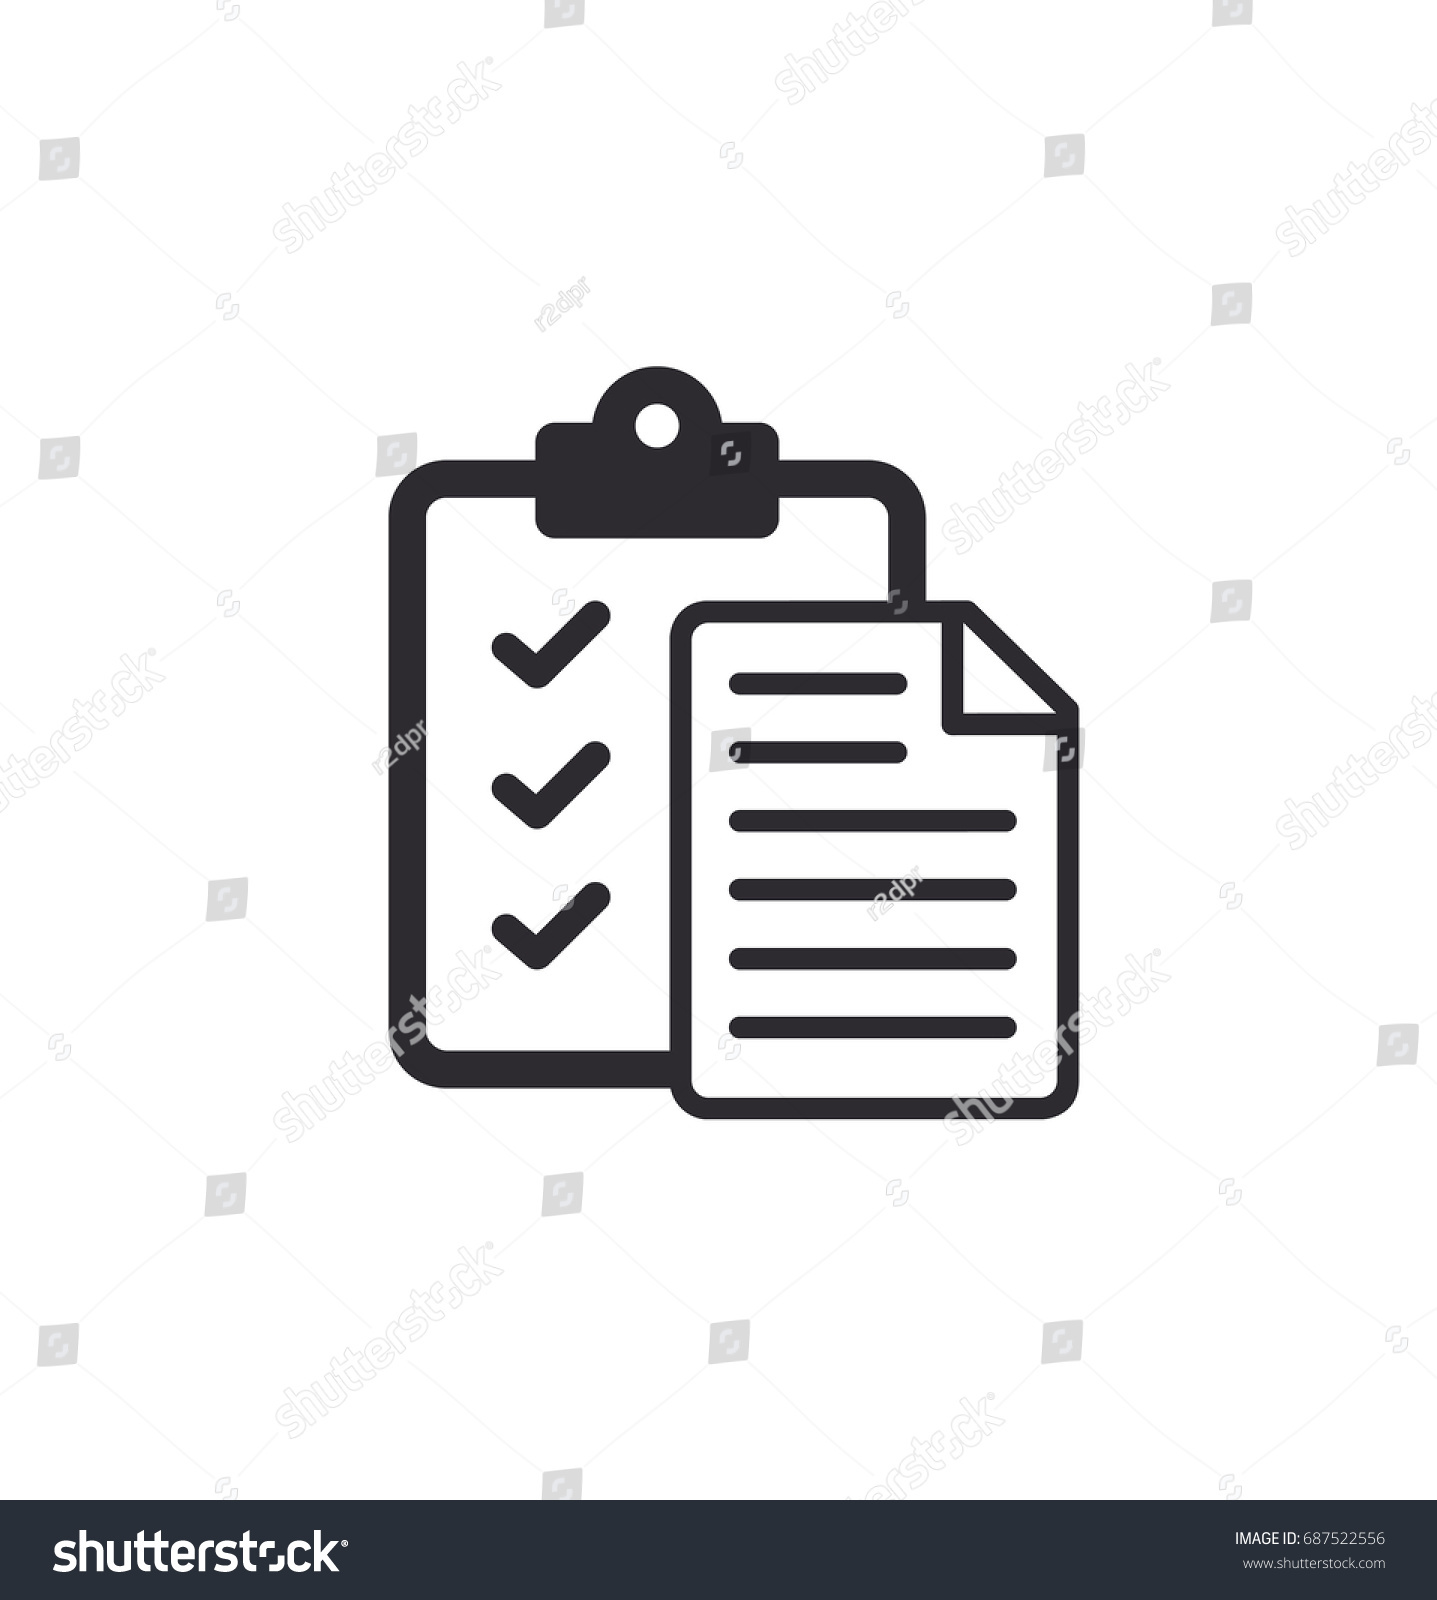 Tasks. Clipboard icon. Task done. Signed approved document icon. Project completed. Check Mark sign. Worksheet sign. Office documents. Survey. Extra options. Application form. Fill in the form. Report #687522556